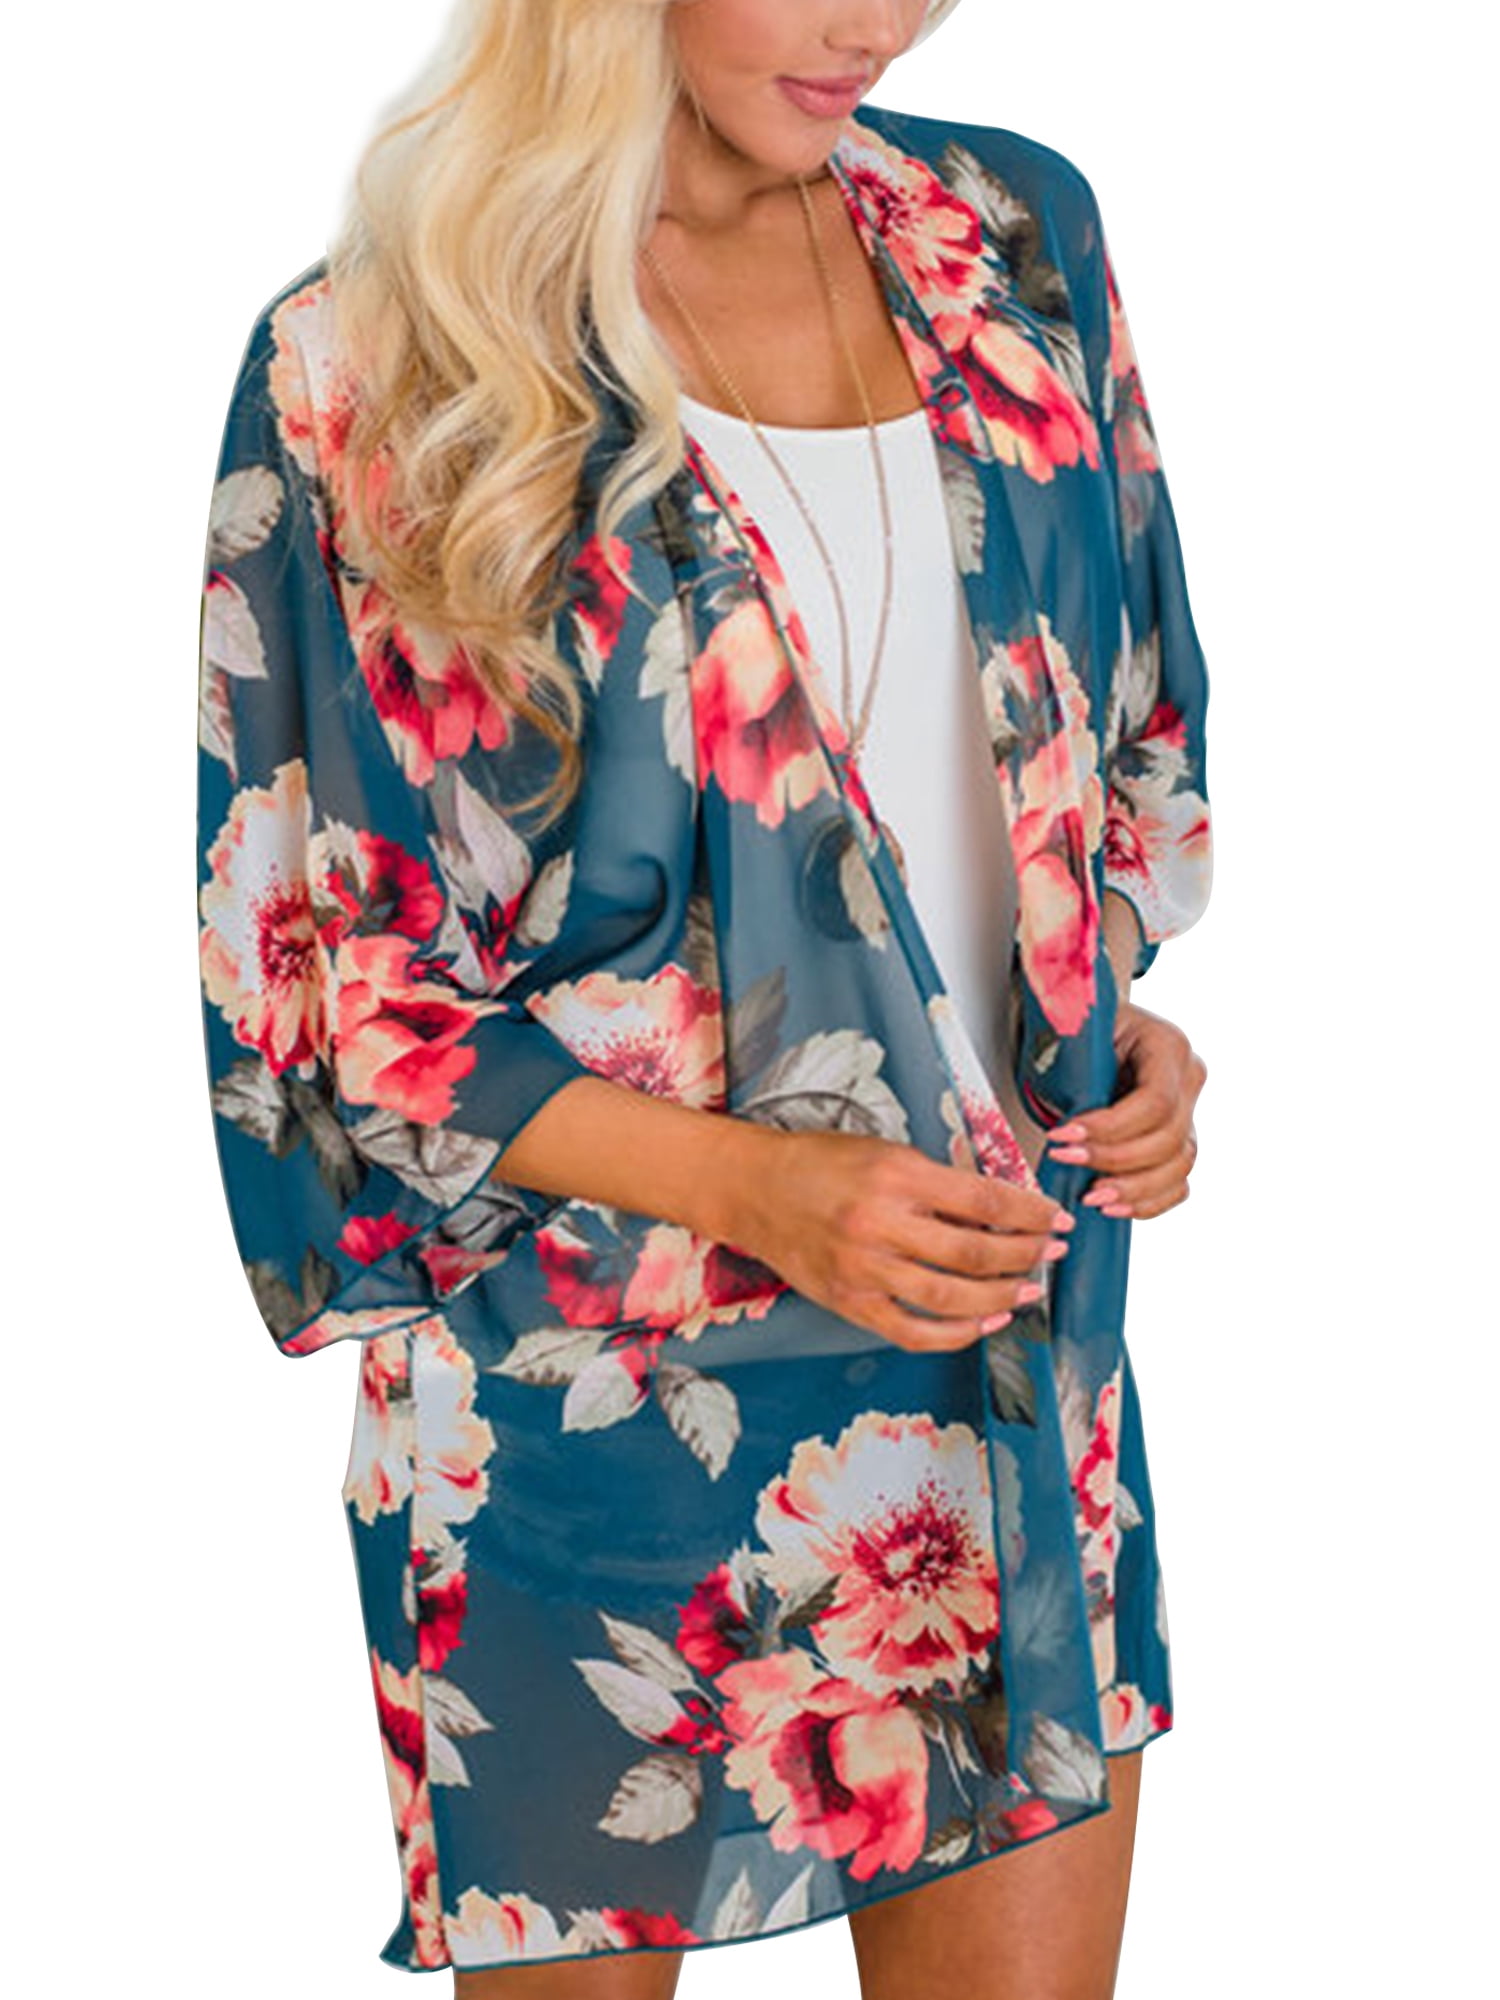 Women's Floral Kimono Cardigans Chiffon Casual Loose Open Front Cover Ups Tops S-XXXL